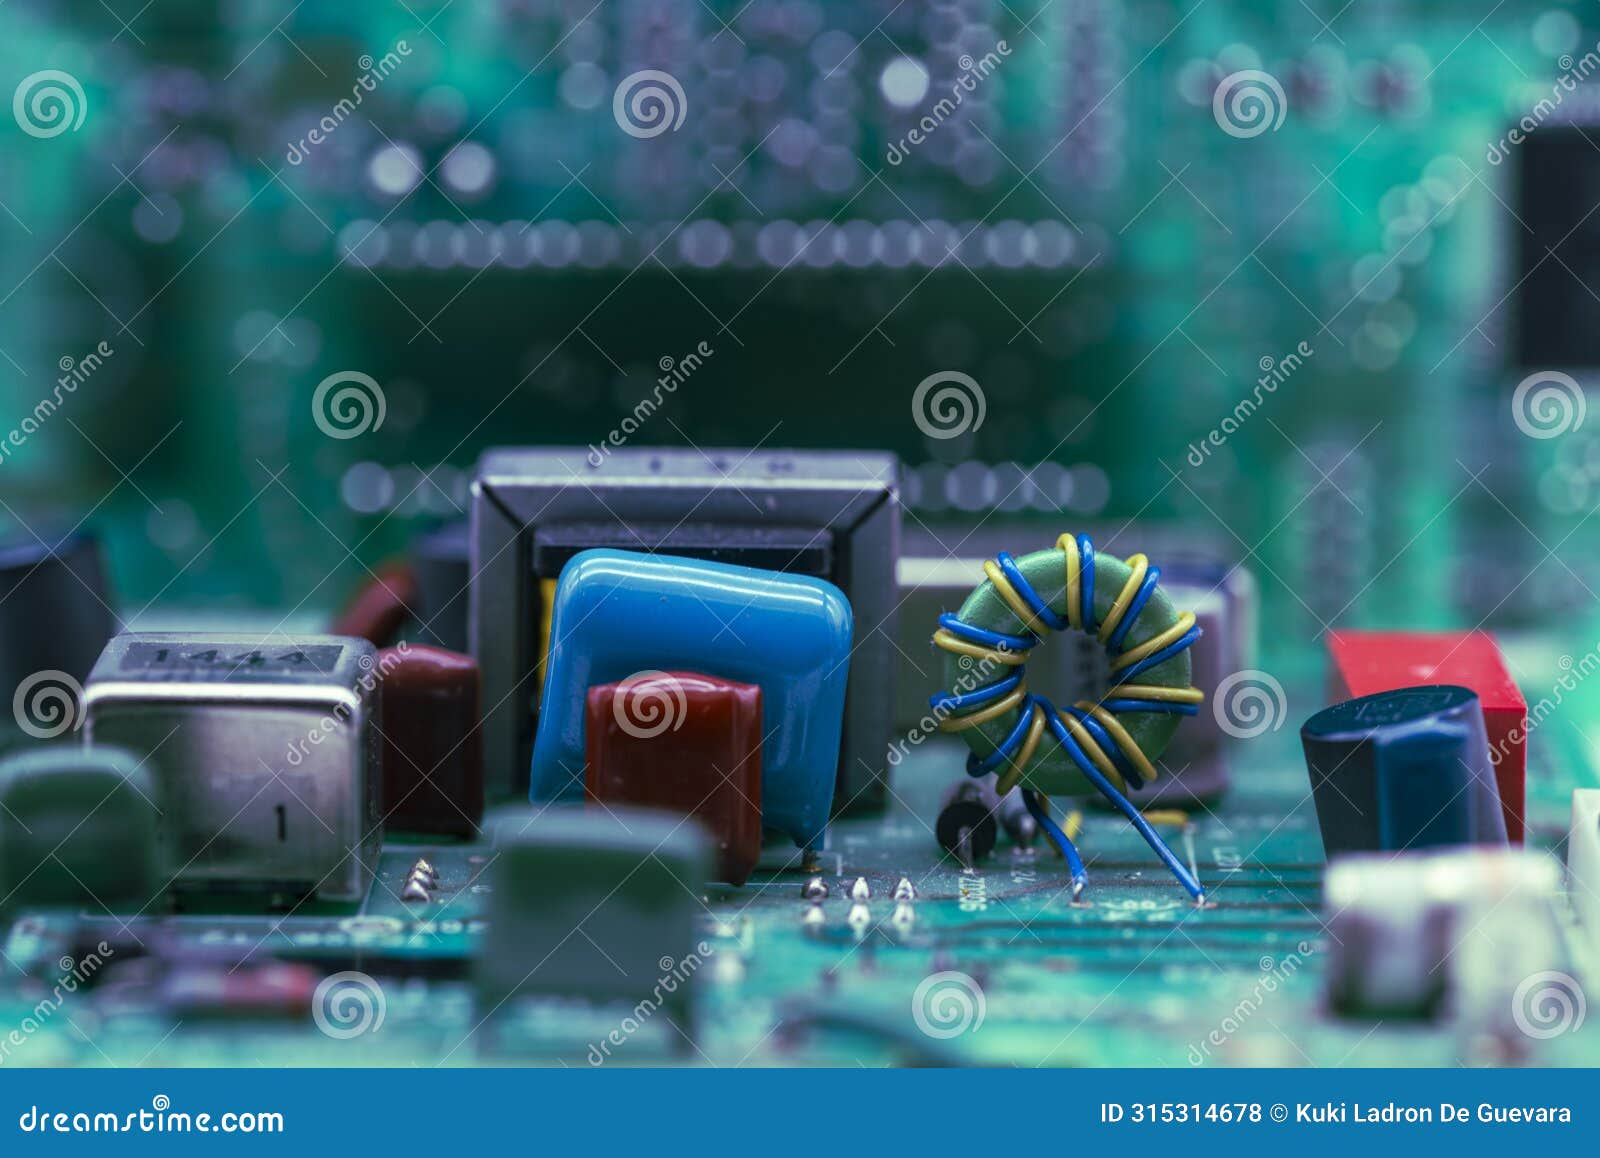 detail of a toroid inductor and electronic components